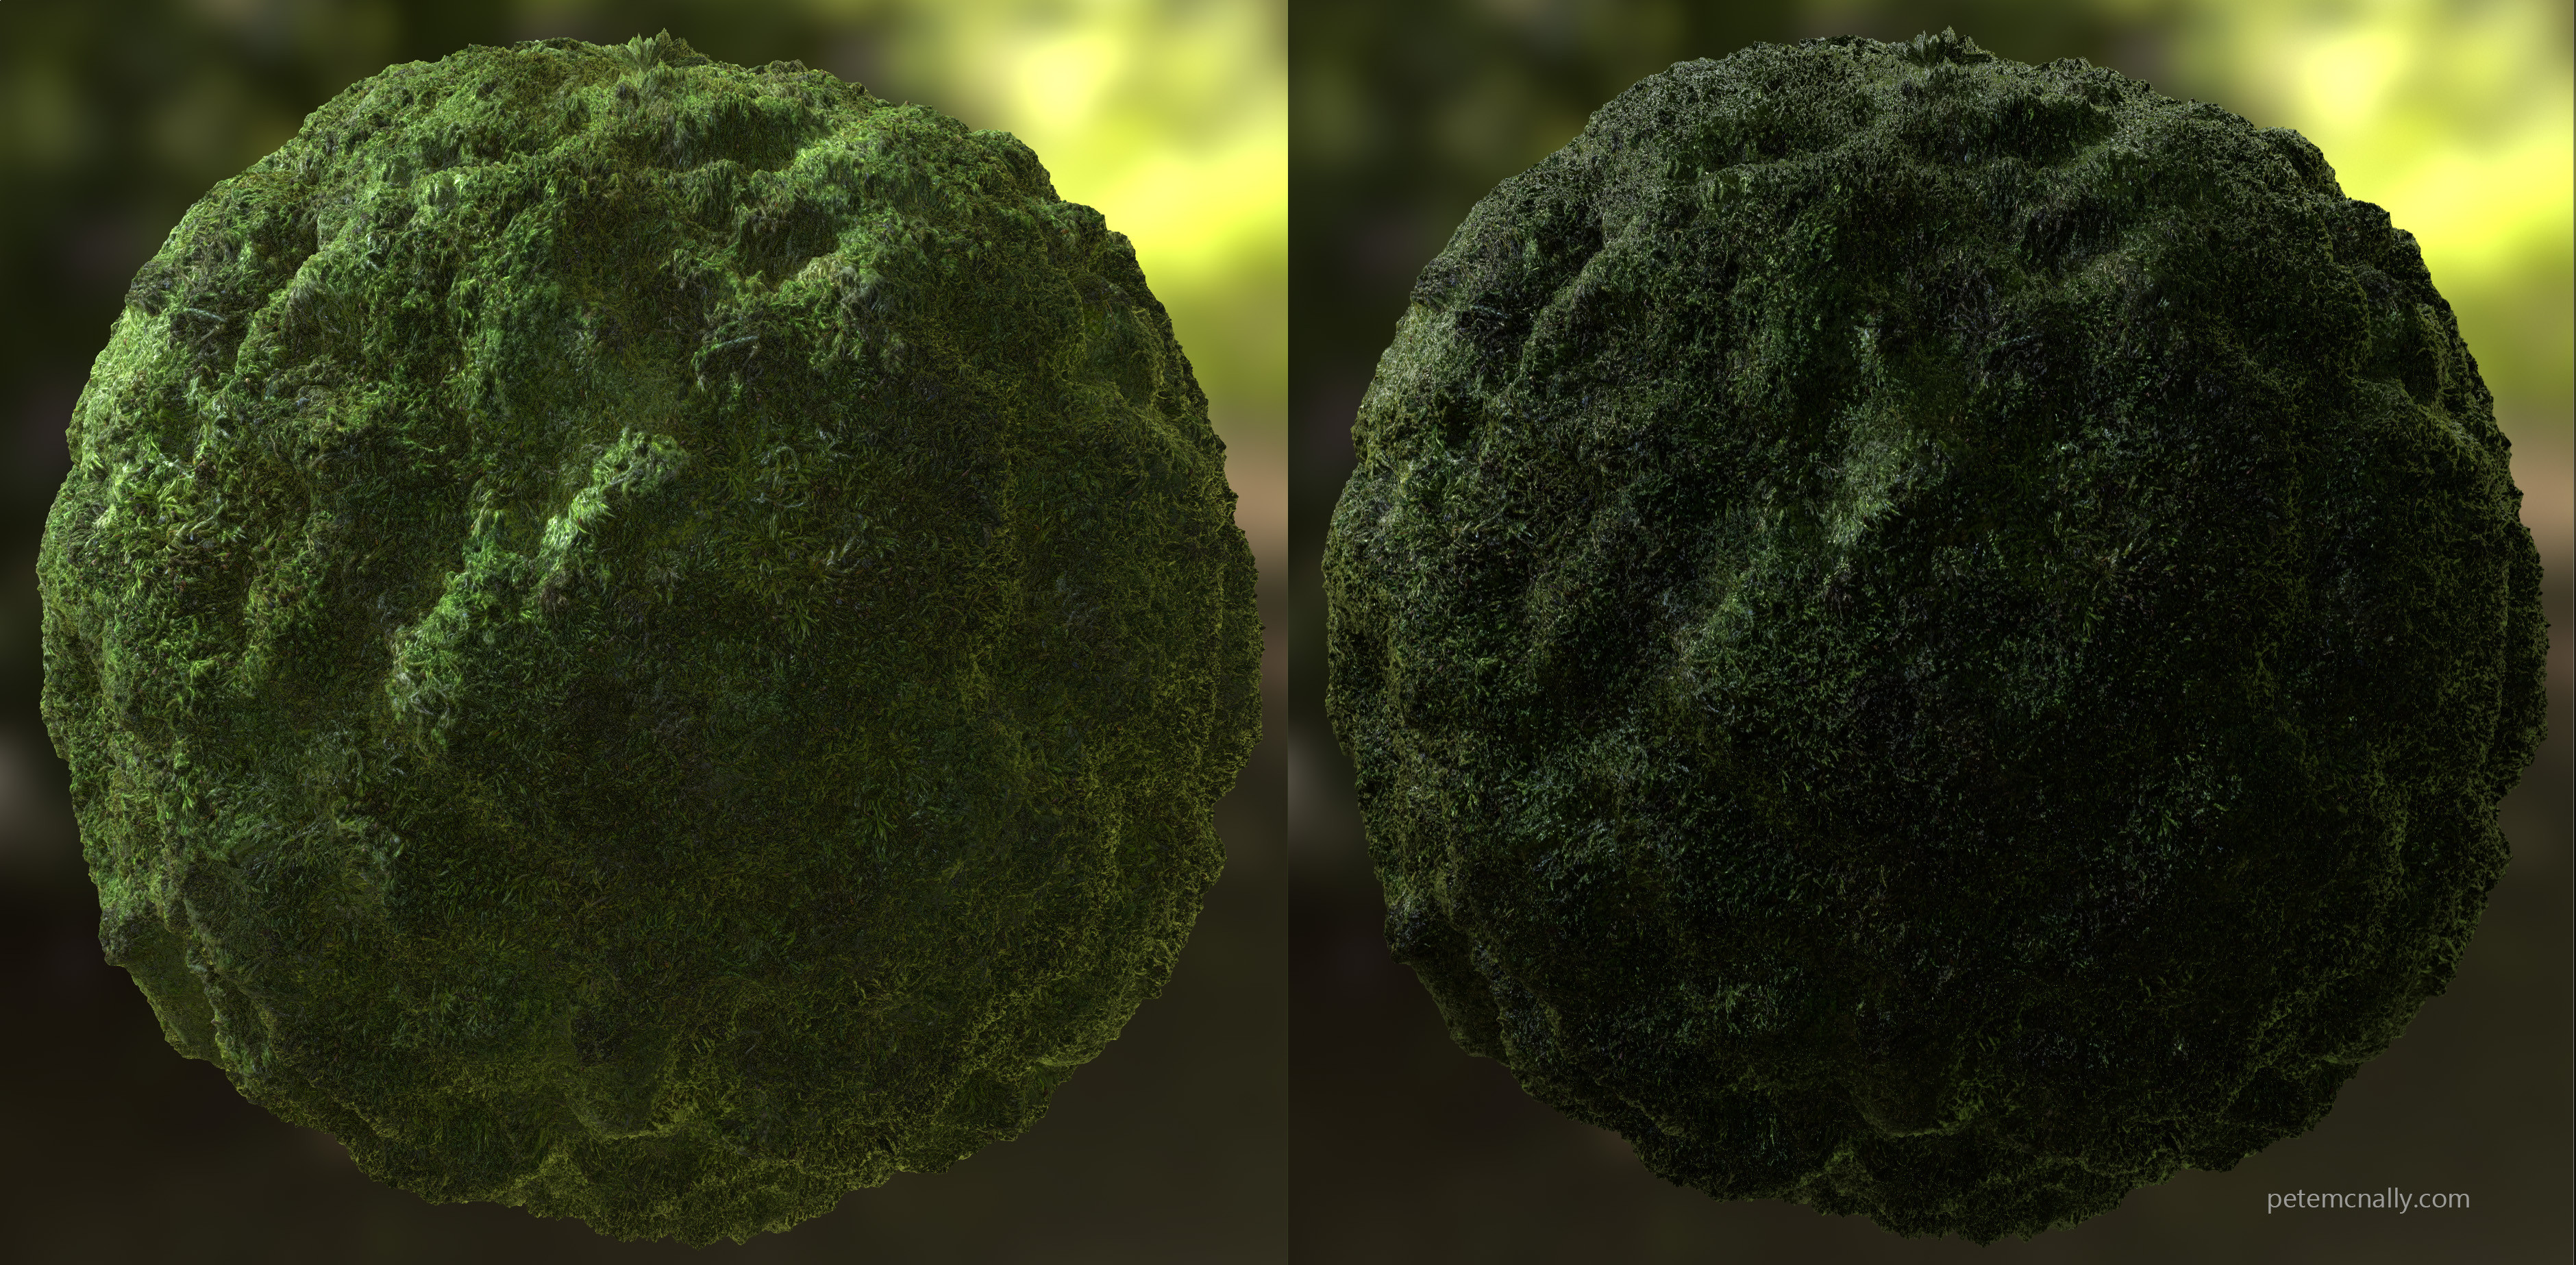 Mat sphere rendered in Toolbag 3. Wet moss variation achieved by changing albedo colour swatch and reducing roughness (Toolbag)